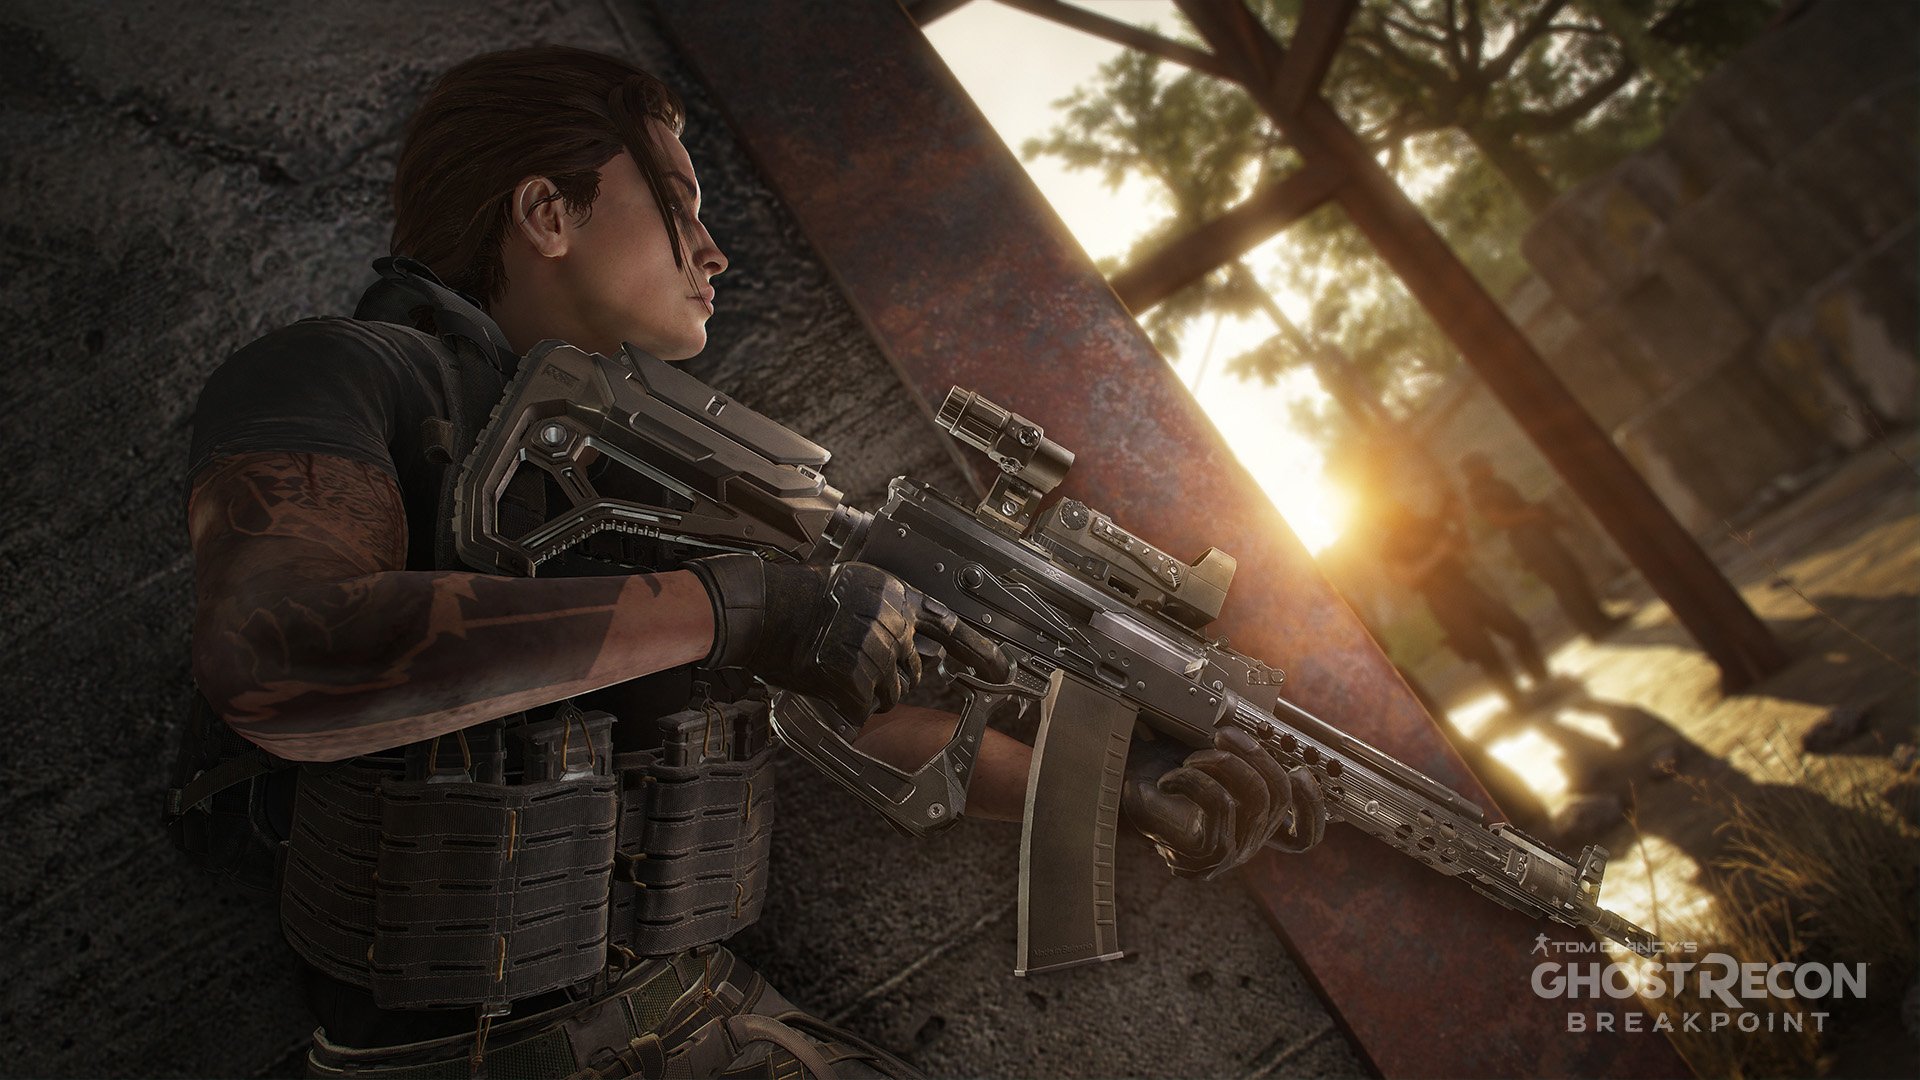 Buka paket Ally Rainbow di Ghost Recon Breakpoint